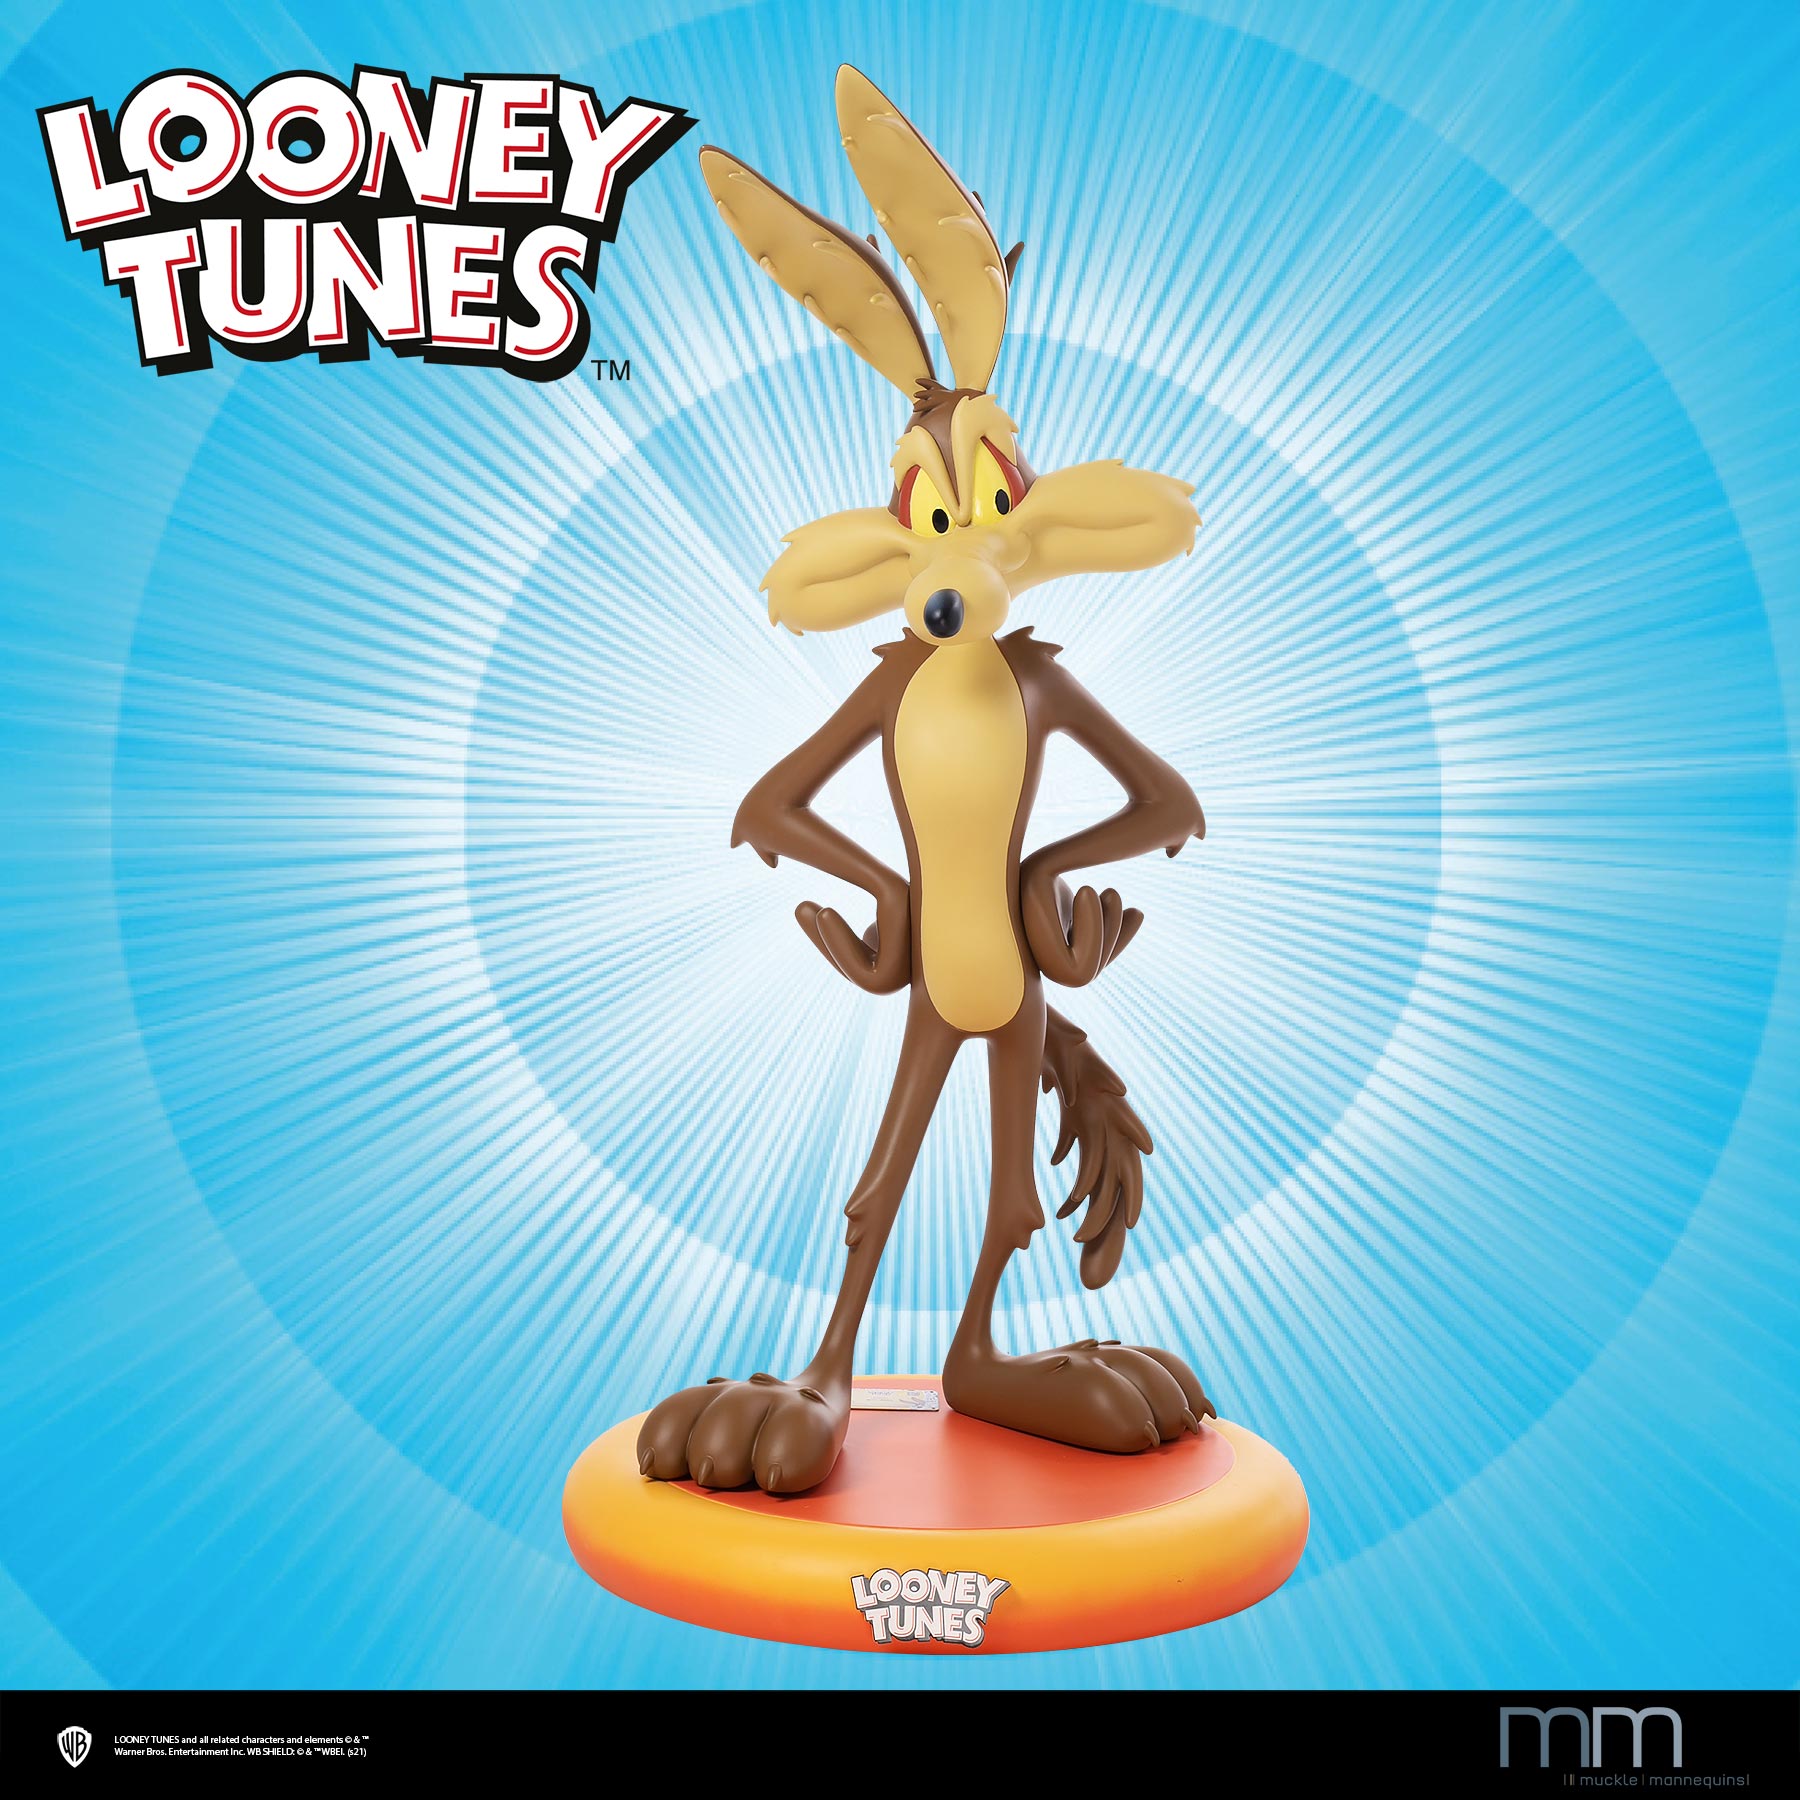 Looney Tunes - Wile E. Coyote Life-Size Statue Muckle